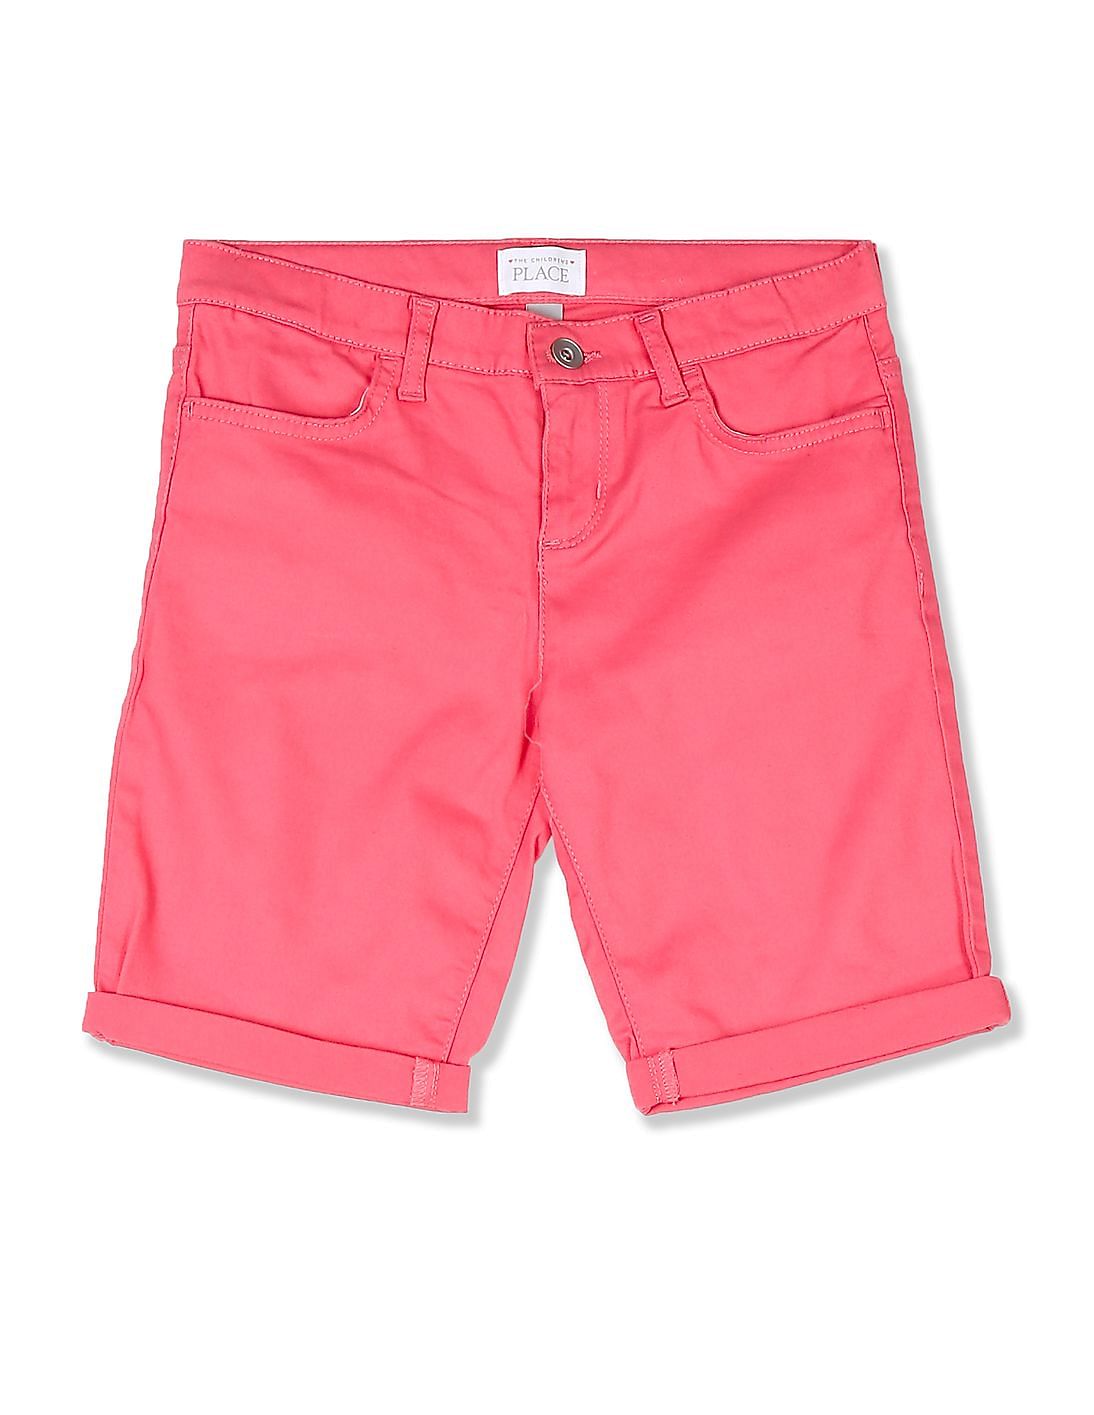 Buy The Children's Place Girls Pink Roll-Cuff Woven Skimmer Shorts ...